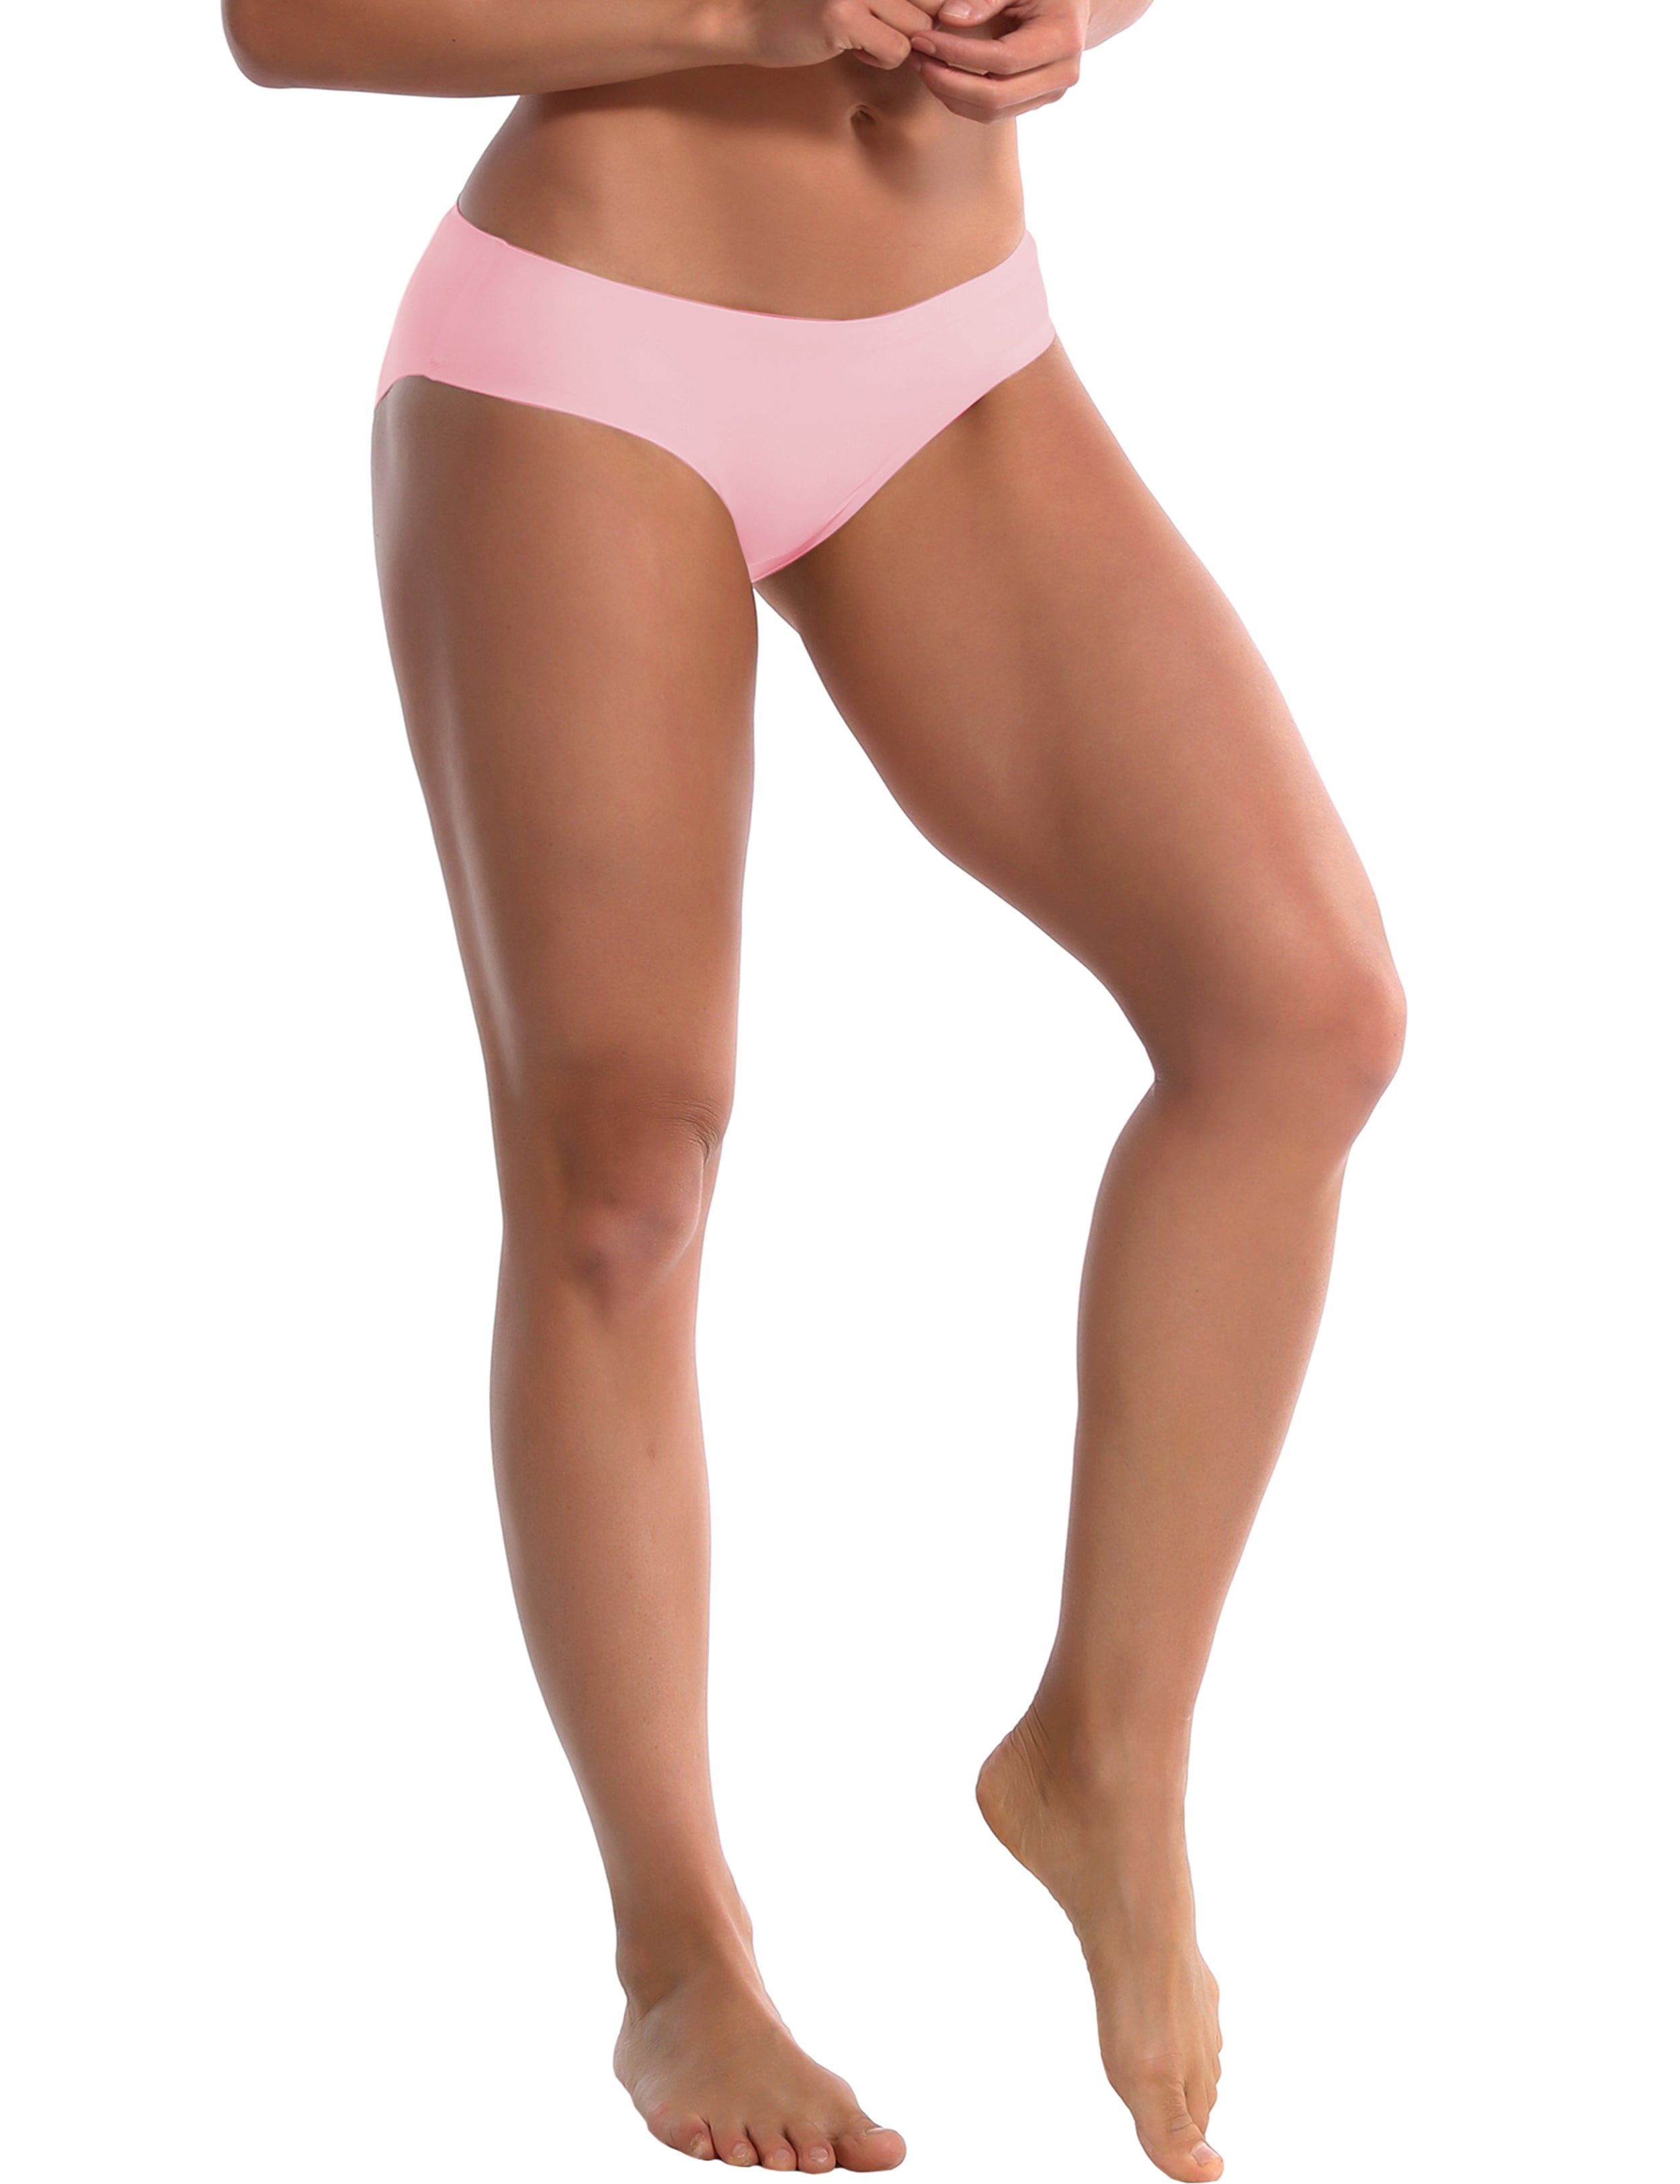 Invisibles Sport Bikini Panties indipink Sleek, soft, smooth and totally comfortable: our newest bikini style is here. High elasticity High density Softest-ever fabric Laser cutting Unsealed Comfortable No panty lines Machine wash 95% Nylon, 5% Spandex